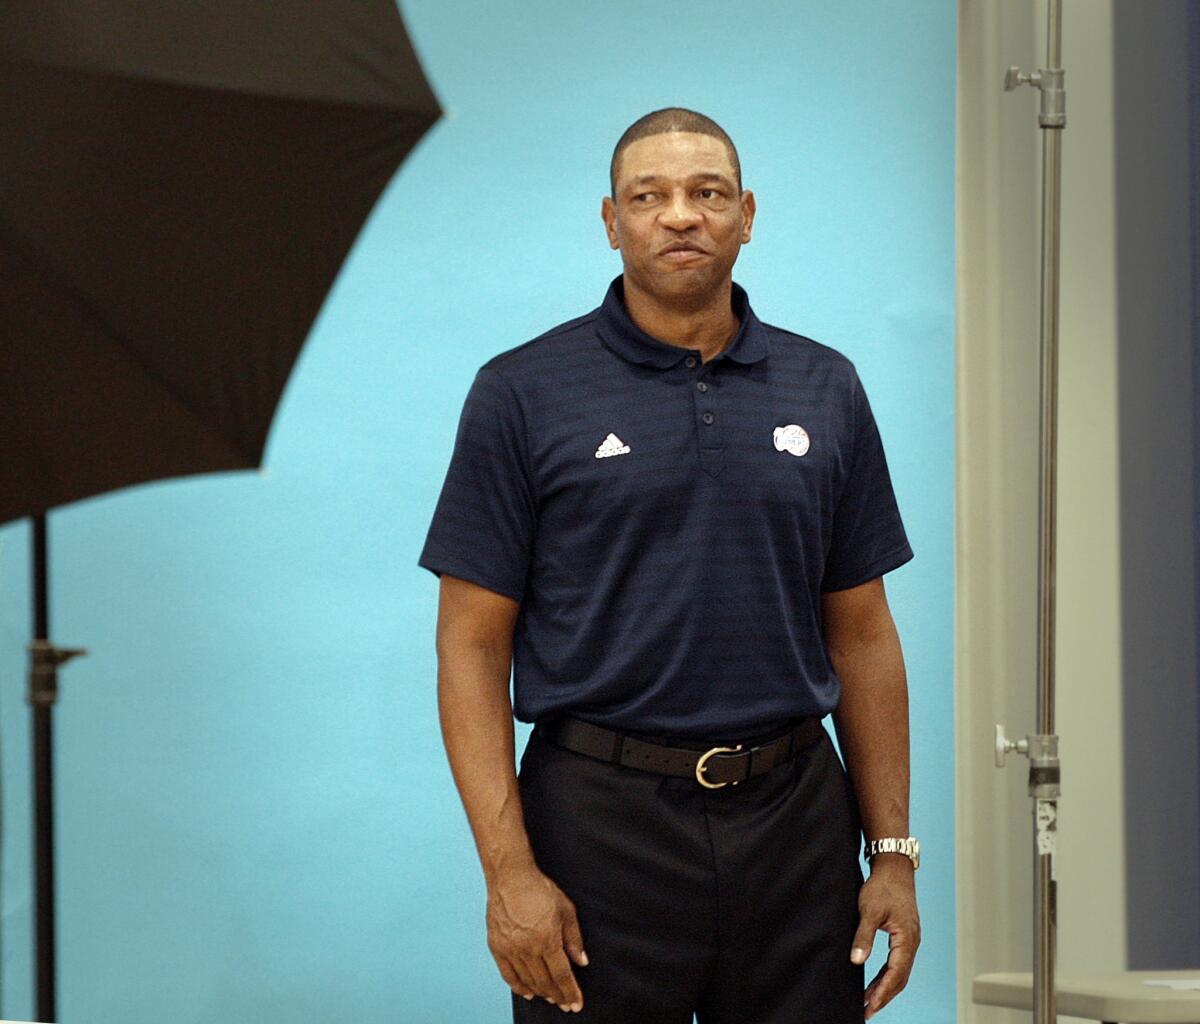 Clippers Coach Doc Rivers is known for being brutally honest. He's also known for winning championships.